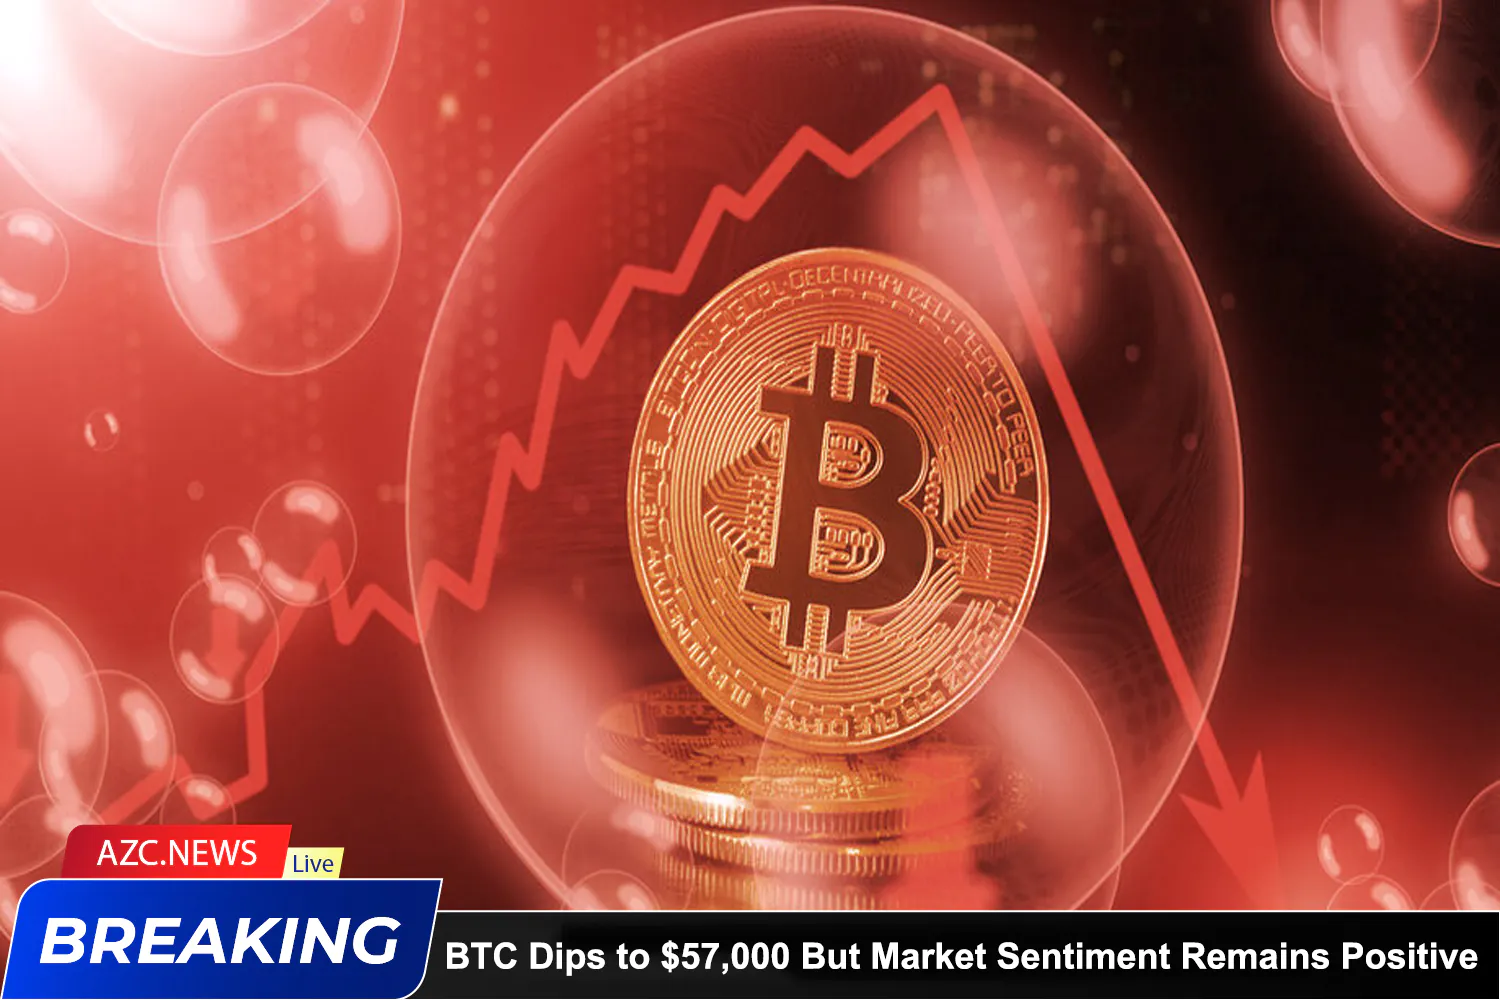 Azcnews Bitcoin Dips To $57,000 But Market Sentiment Remains Positive